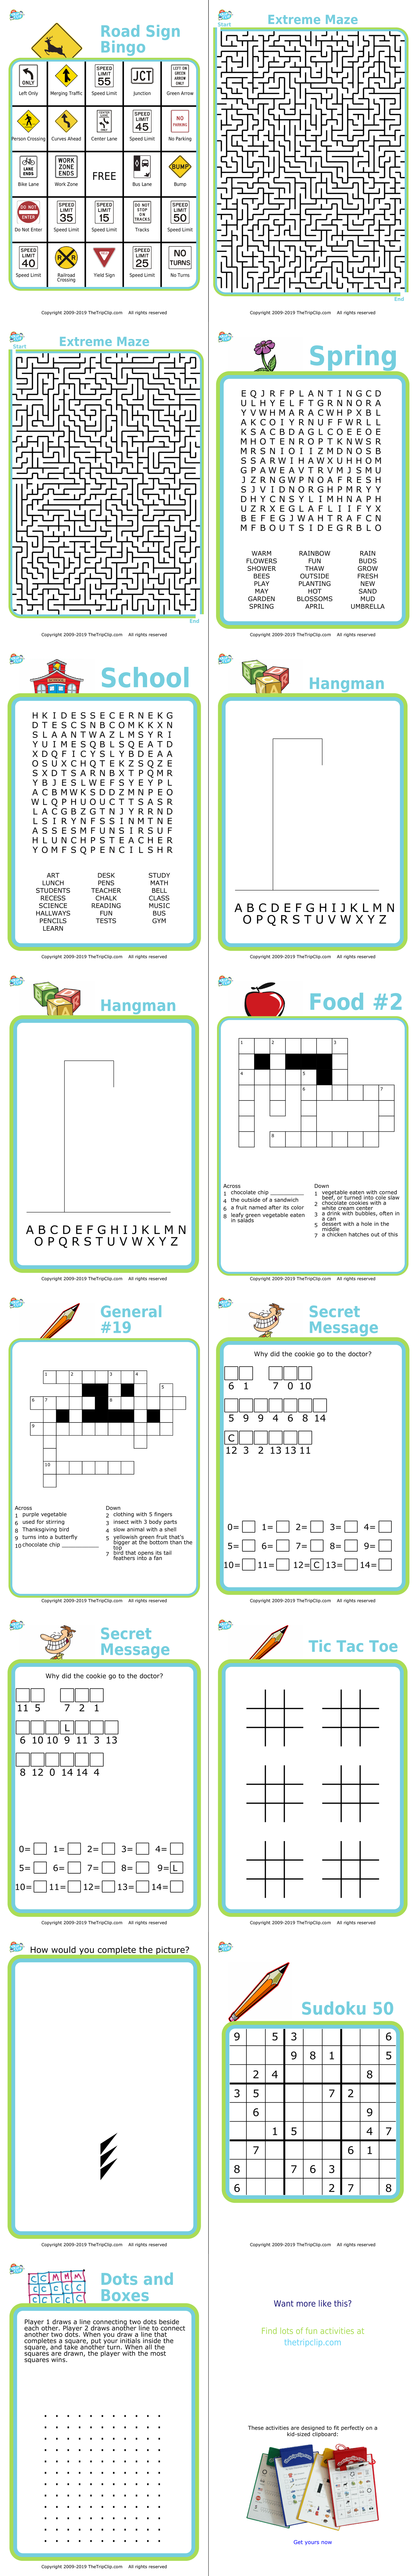 15 travel activities like bingo, mazes, coloring, wordsearch, crosswords, drawing, and more